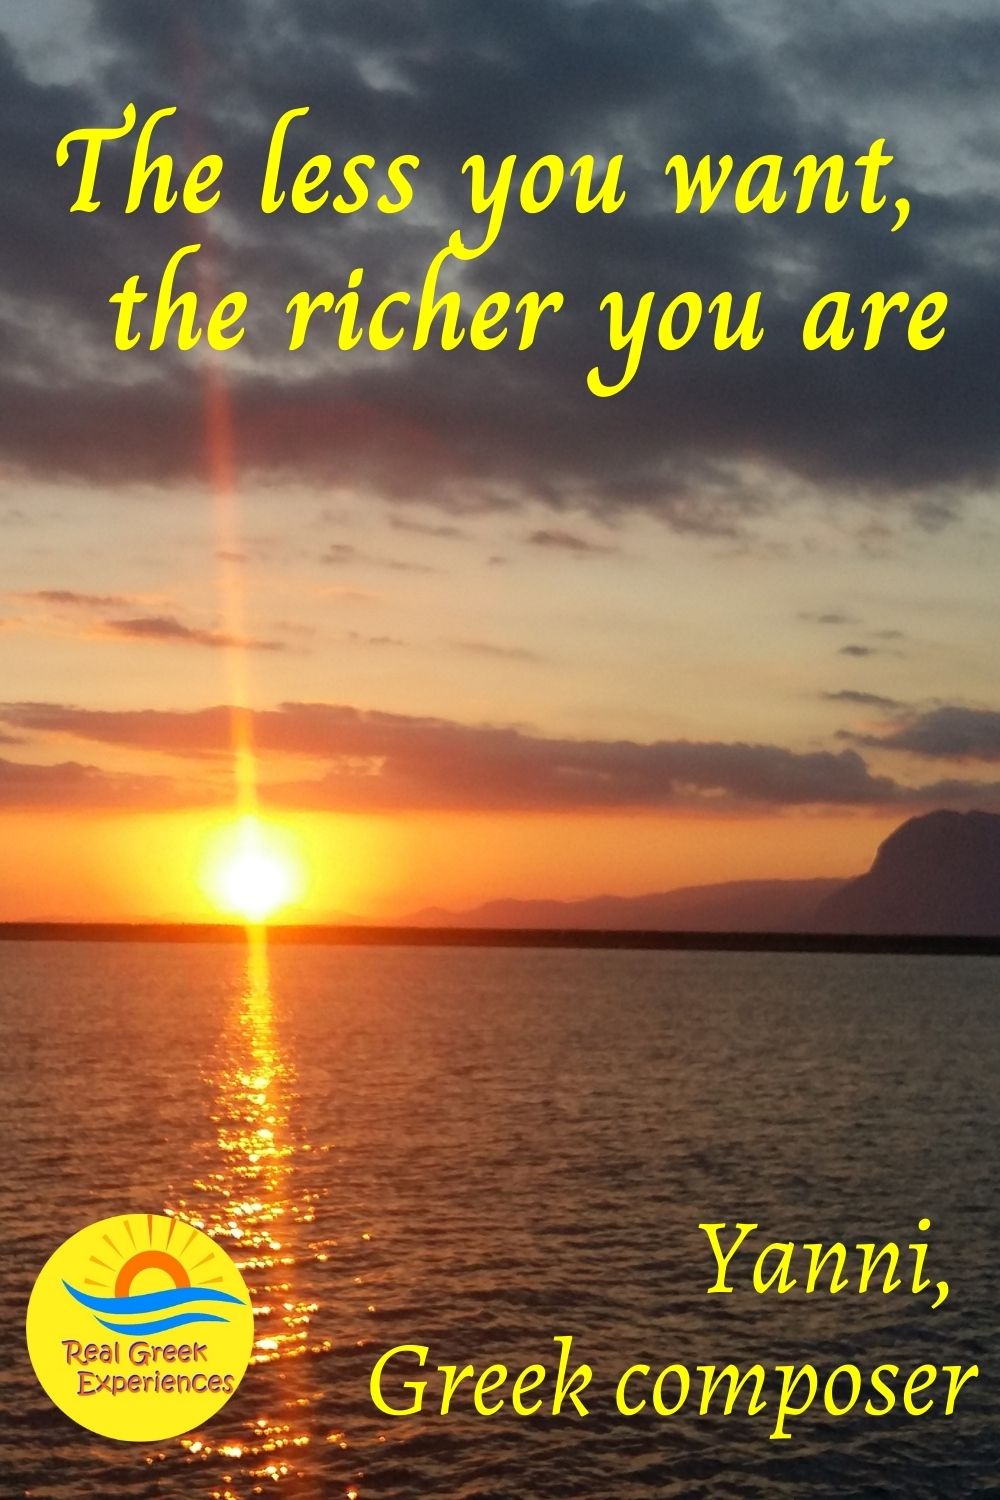 Quotes about Greece - The less you want, the richer you are - Yianni